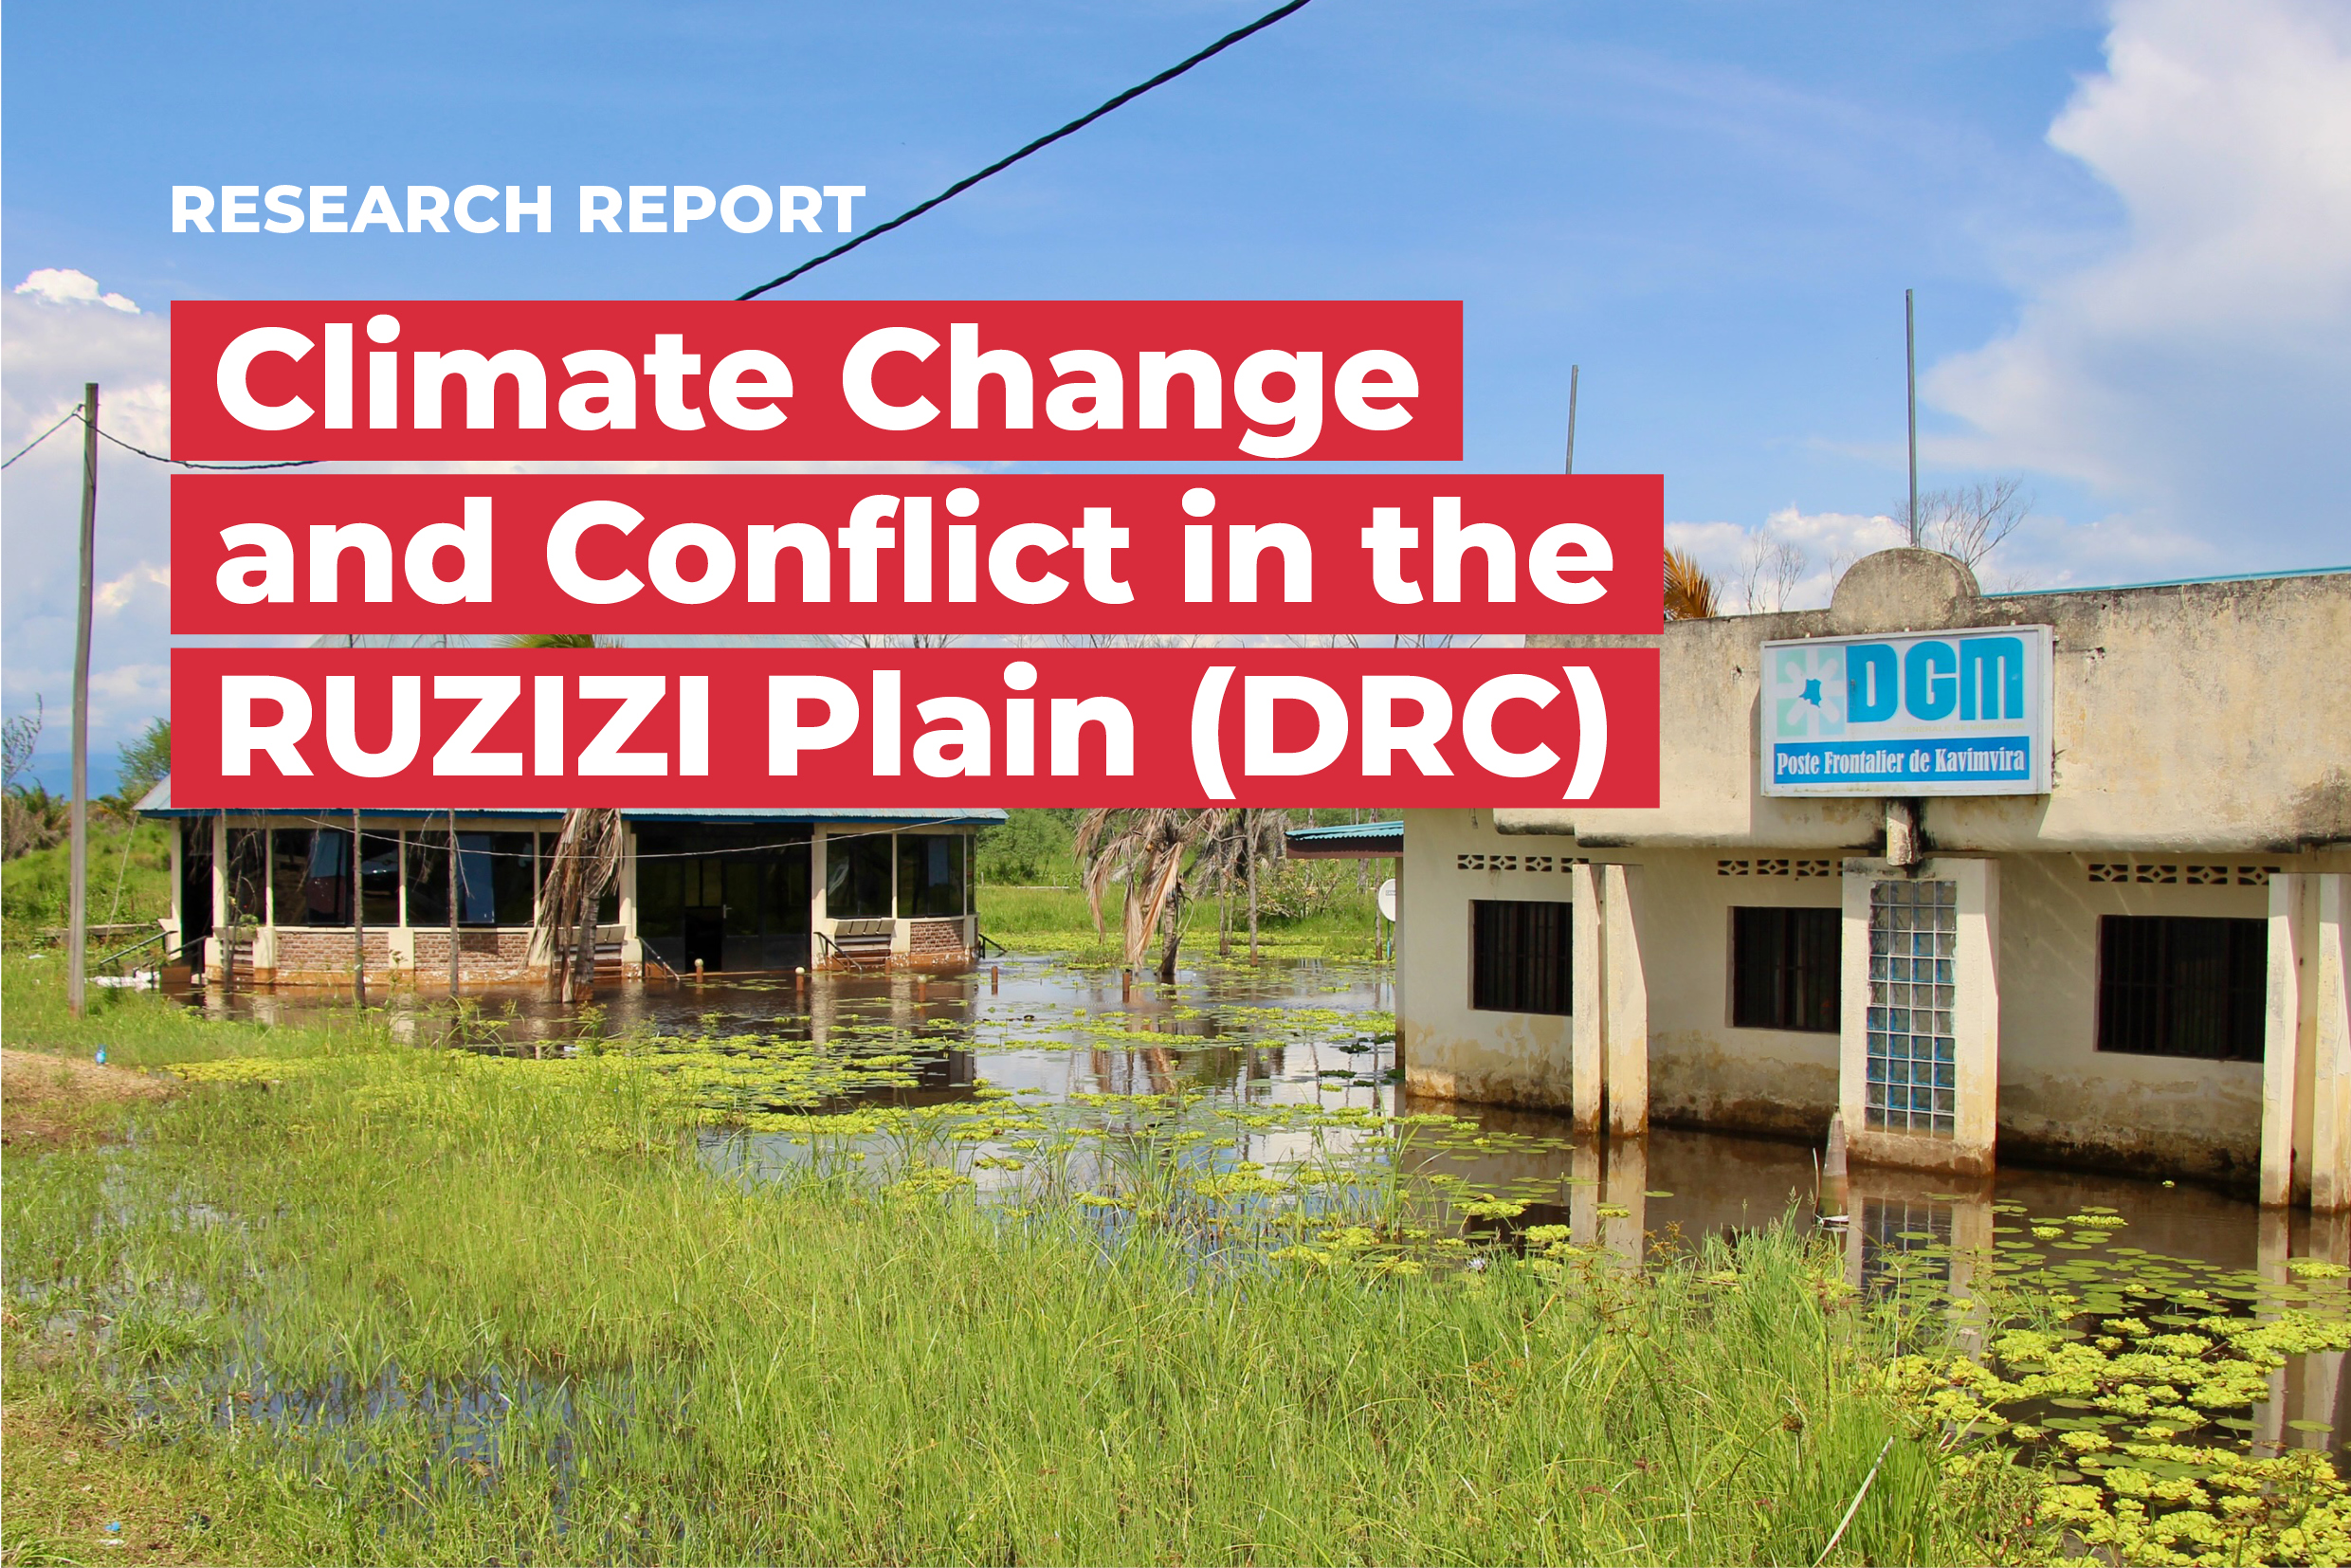 Research_Report_Climate Change and Conflict in the RUZIZI Plain (DRC)_2